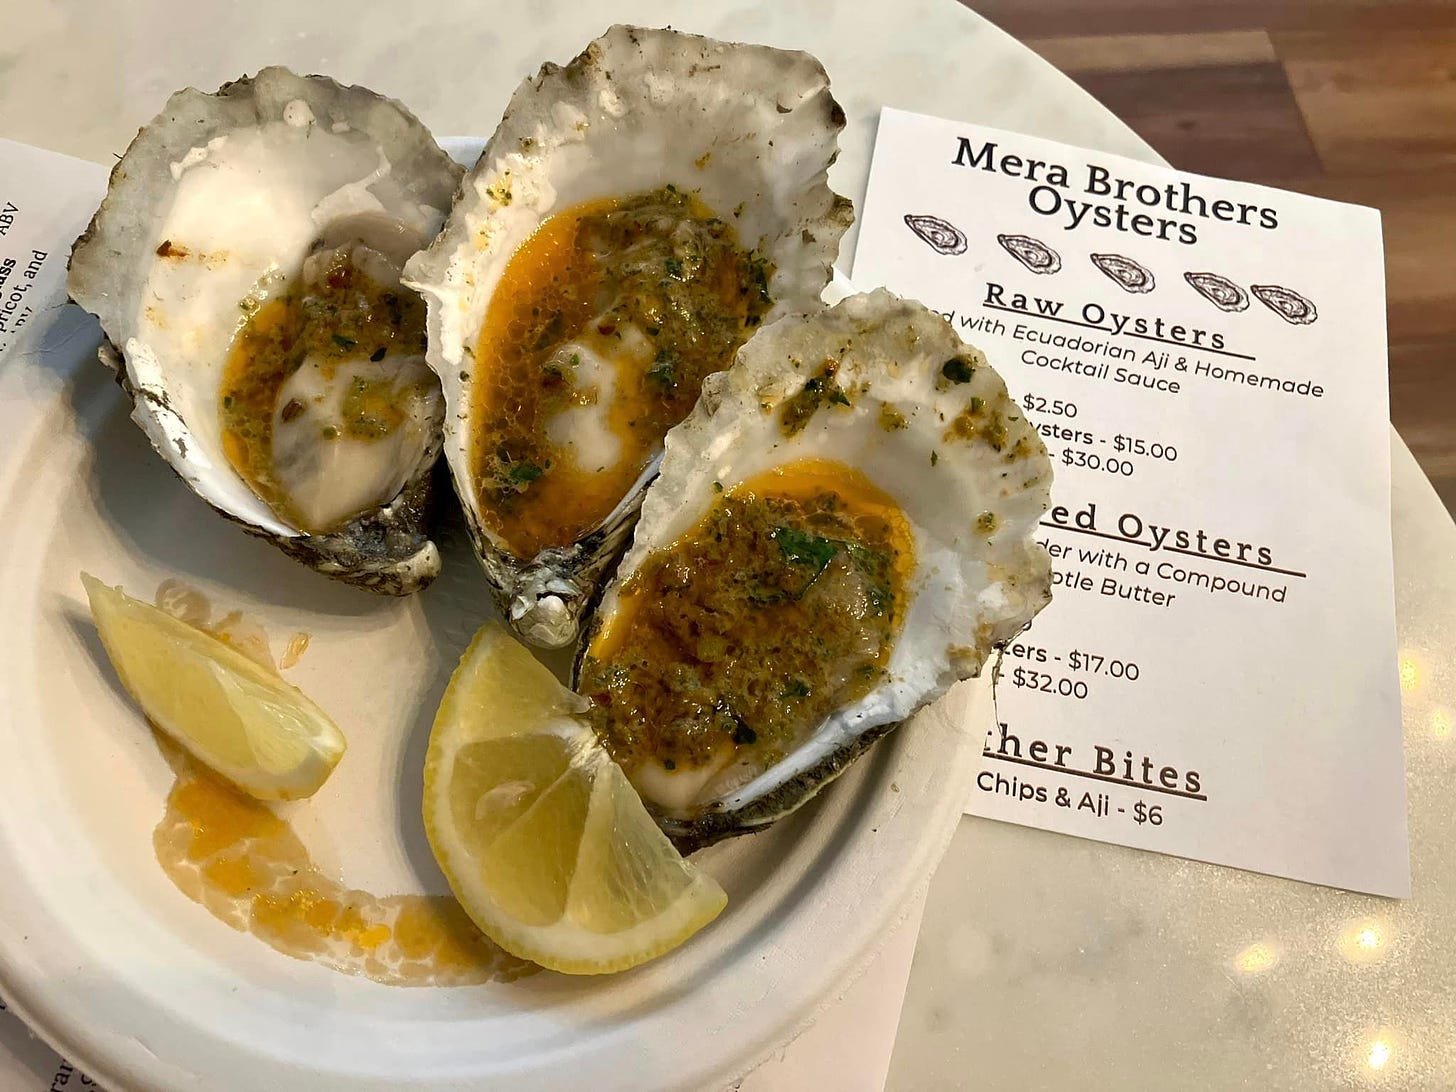 May be an image of text that says 'AY 19 ខ and ۱۹٩ Mera Oysters Brothers with Raw ( Ecuadoriar Cocktail Oysters sters Aji Sauce Homemade $2.50 sters- $30.00 $15.00 ed der with Oysters ptle Butter Compound ers $32.00 $17.00 her Bites Chips Aji $6'